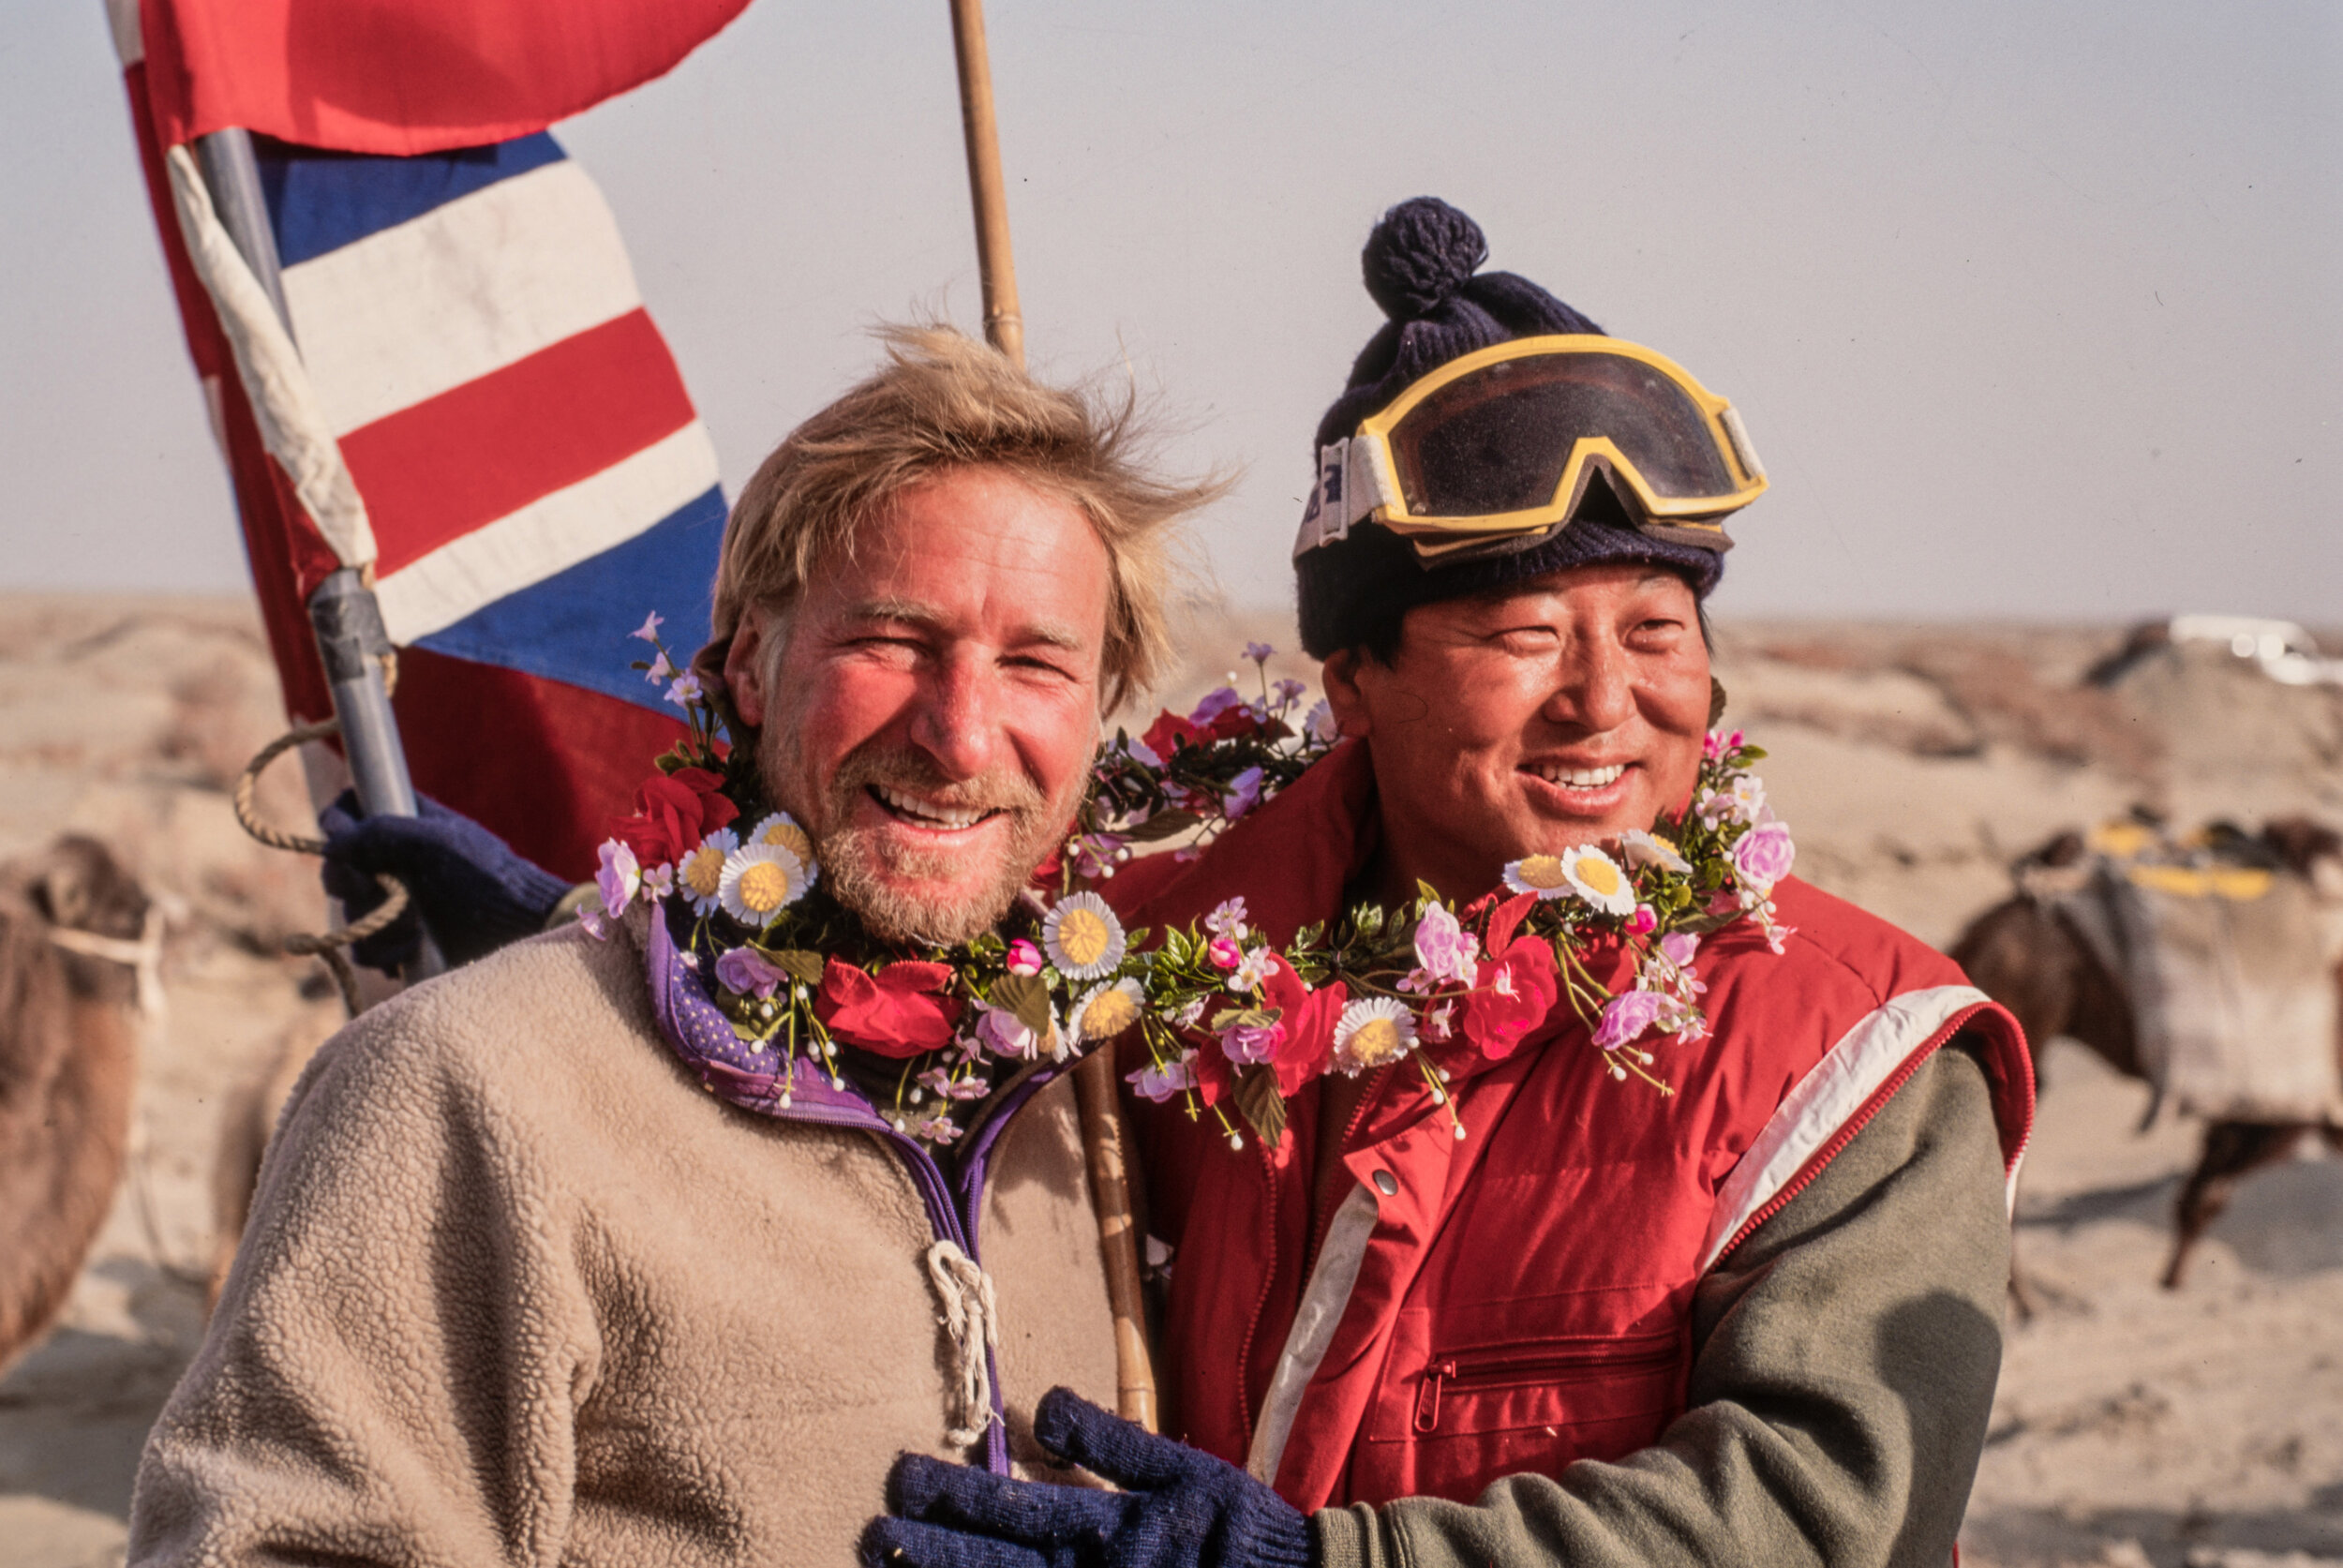  Charles and Gwo celebrate the completion of the first ever crossing of the Taklamakan Desert. 